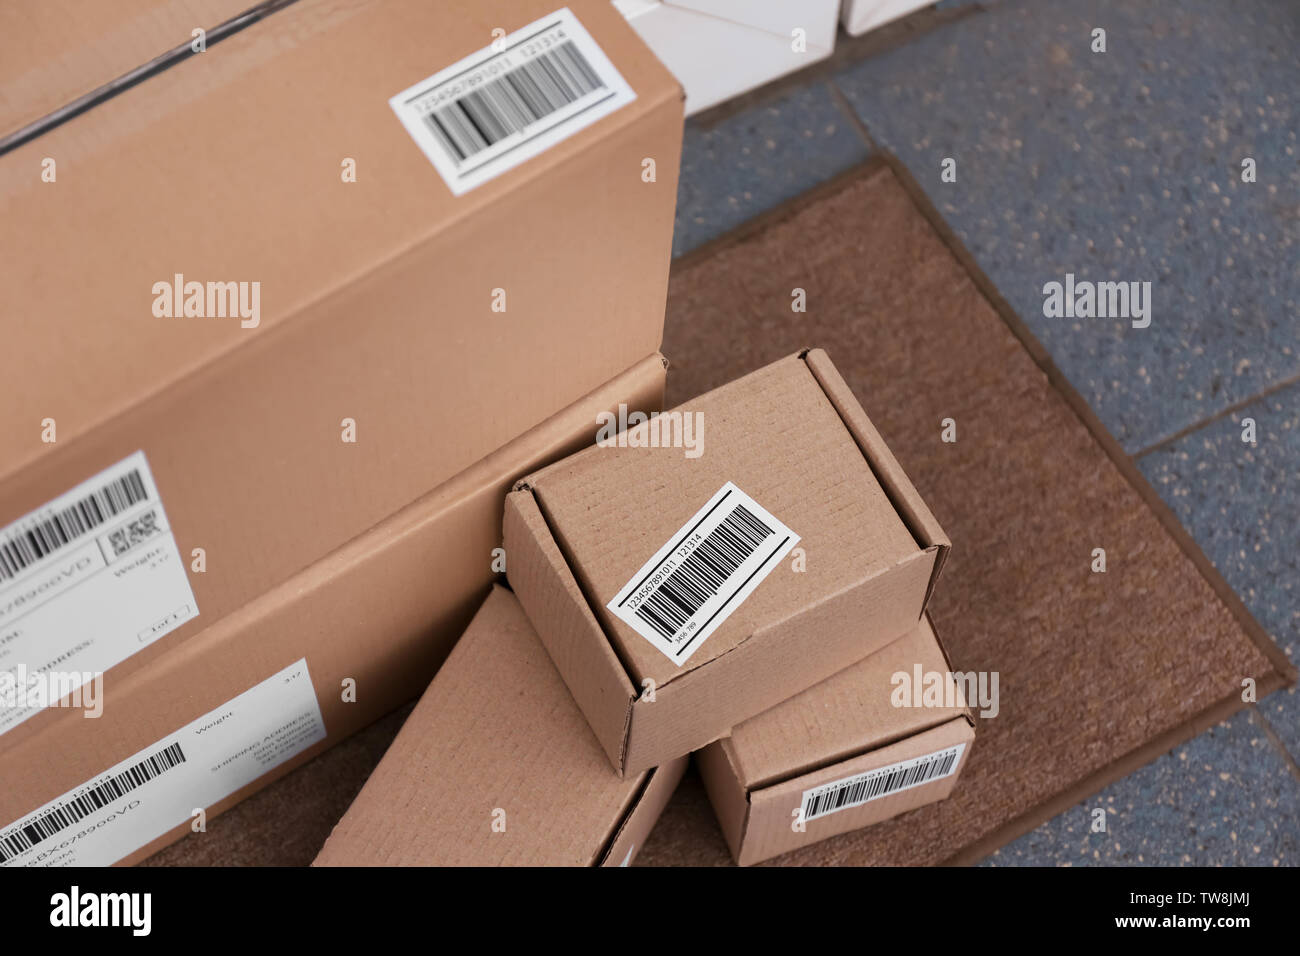 Delivered parcels on doormat, closeup Stock Photo